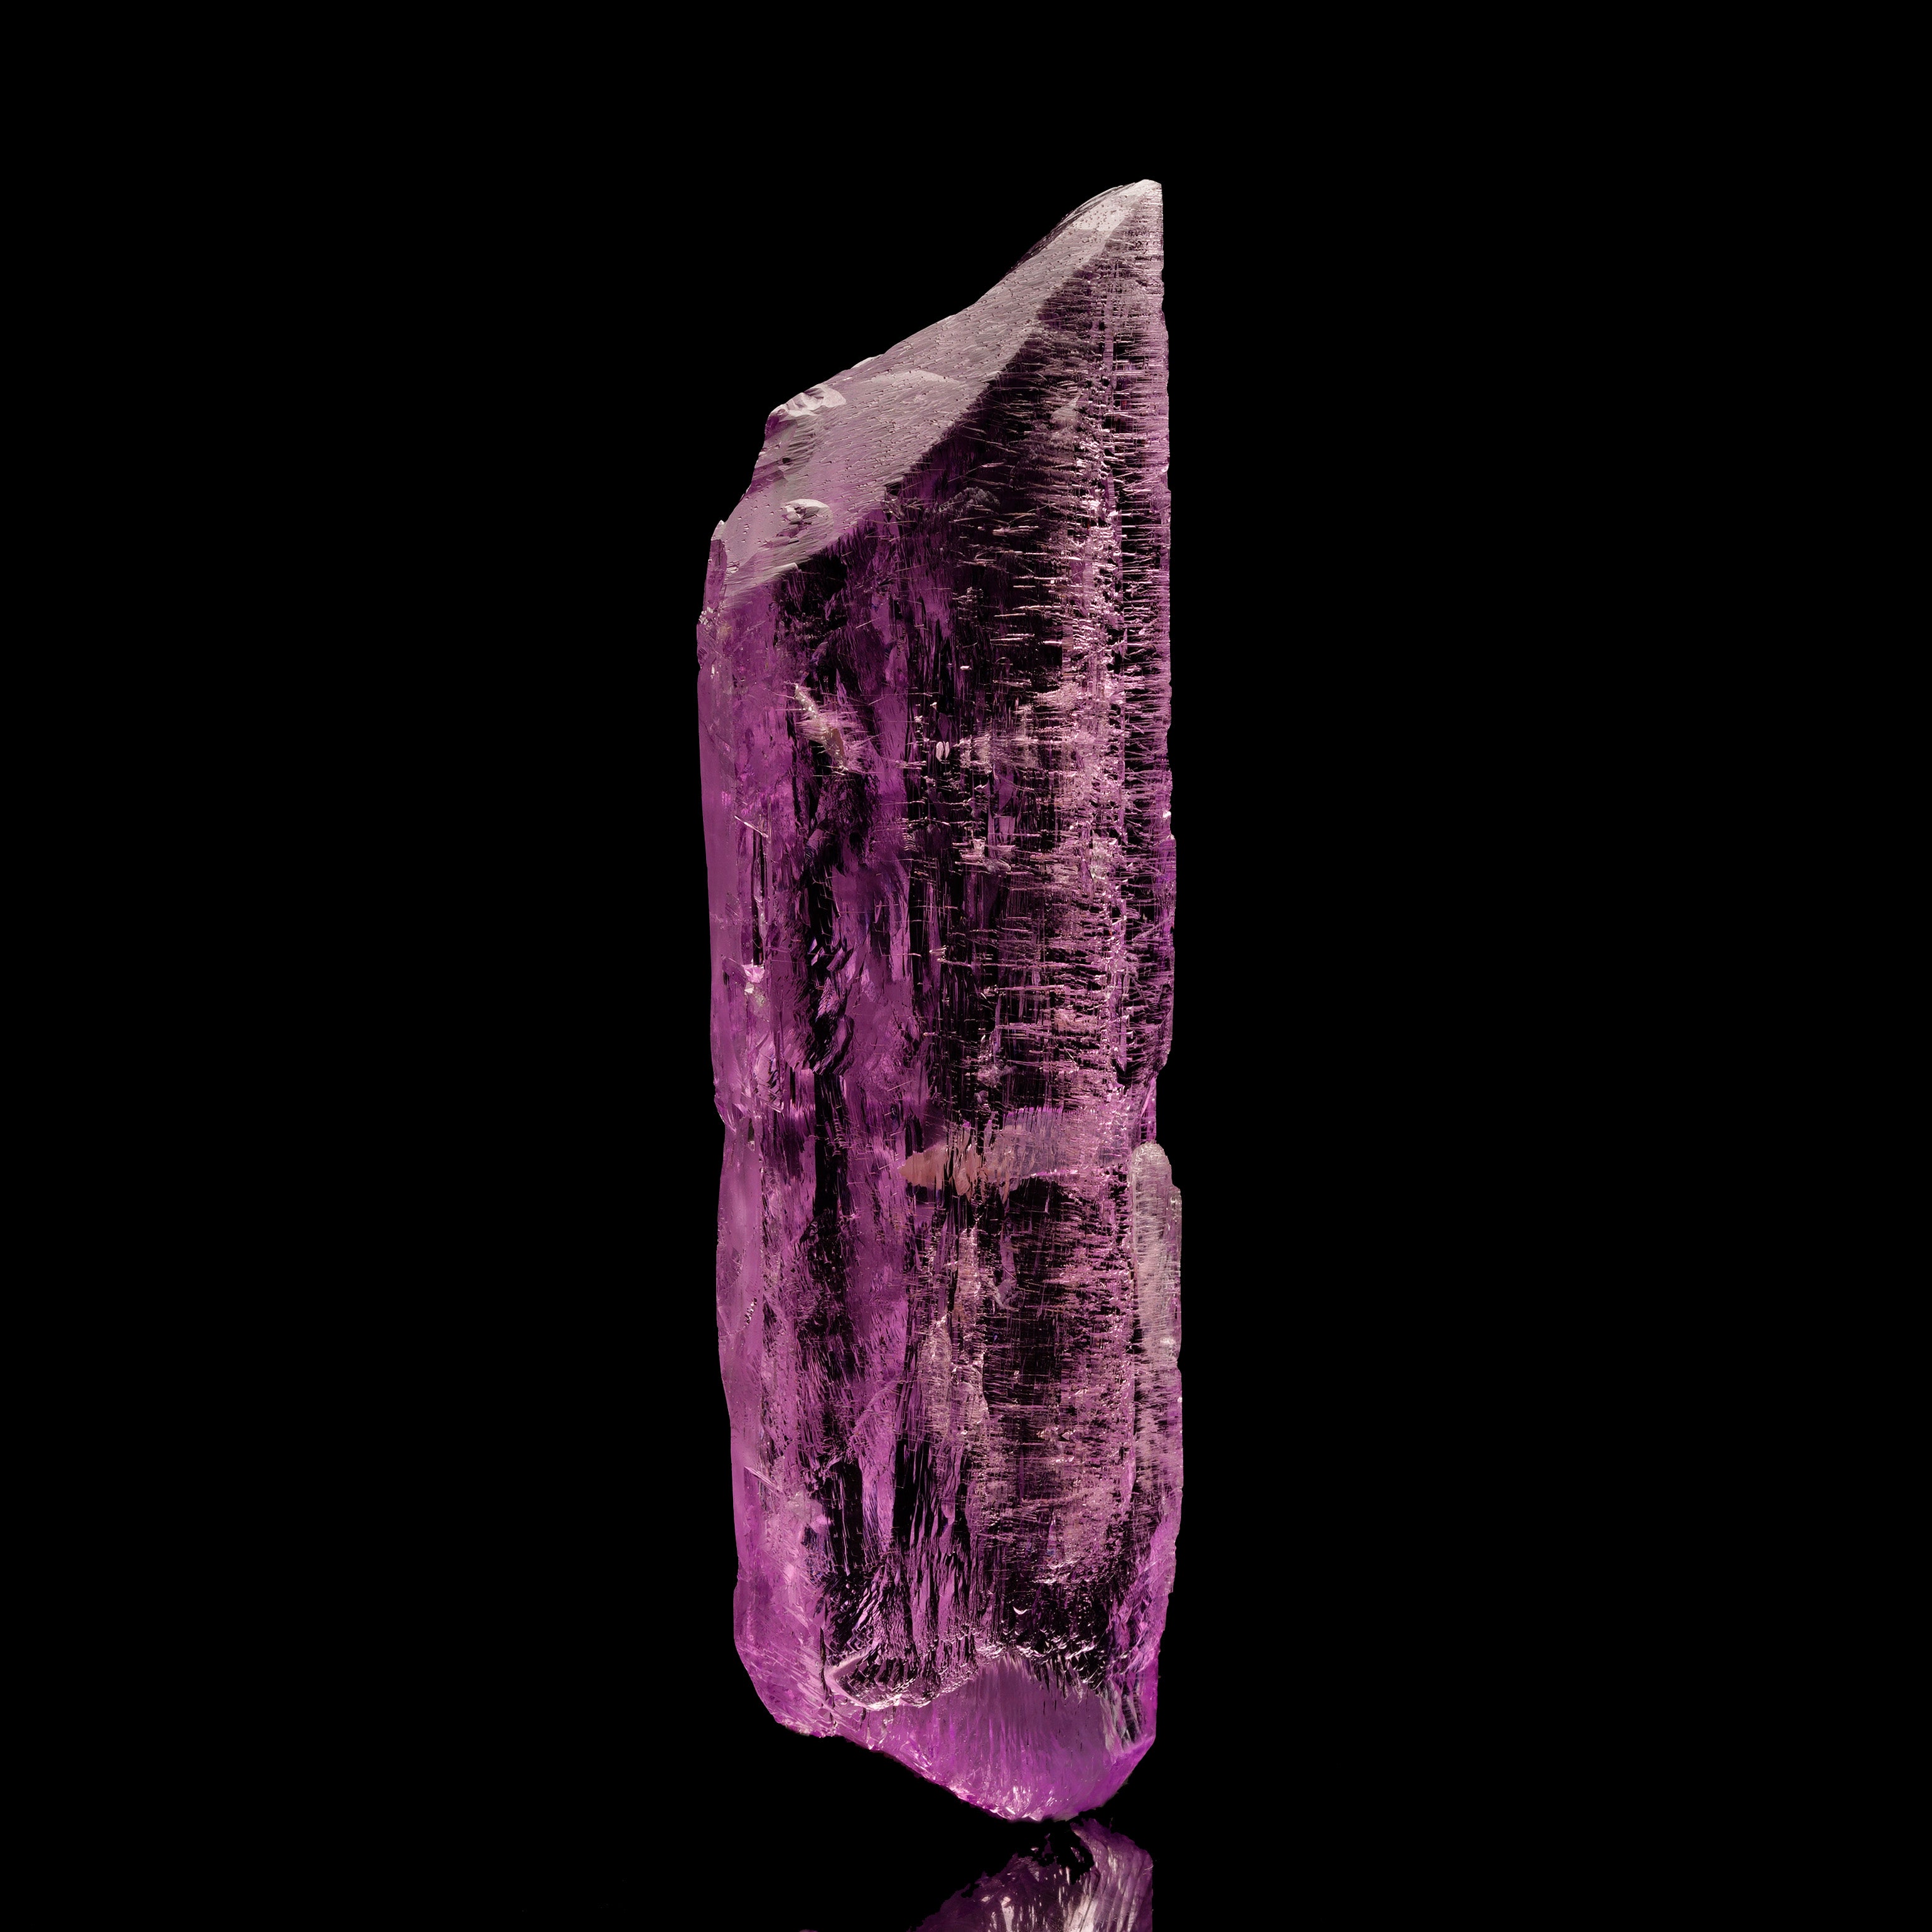 A classic Brazilian Kunzite specimen showing interesting hydrothermal etching on the glassy faces of this uniquely-shaped crystal. Pristine! The piece is a floater with no point of attachment and it radiates a lovely pastel pink color that is much